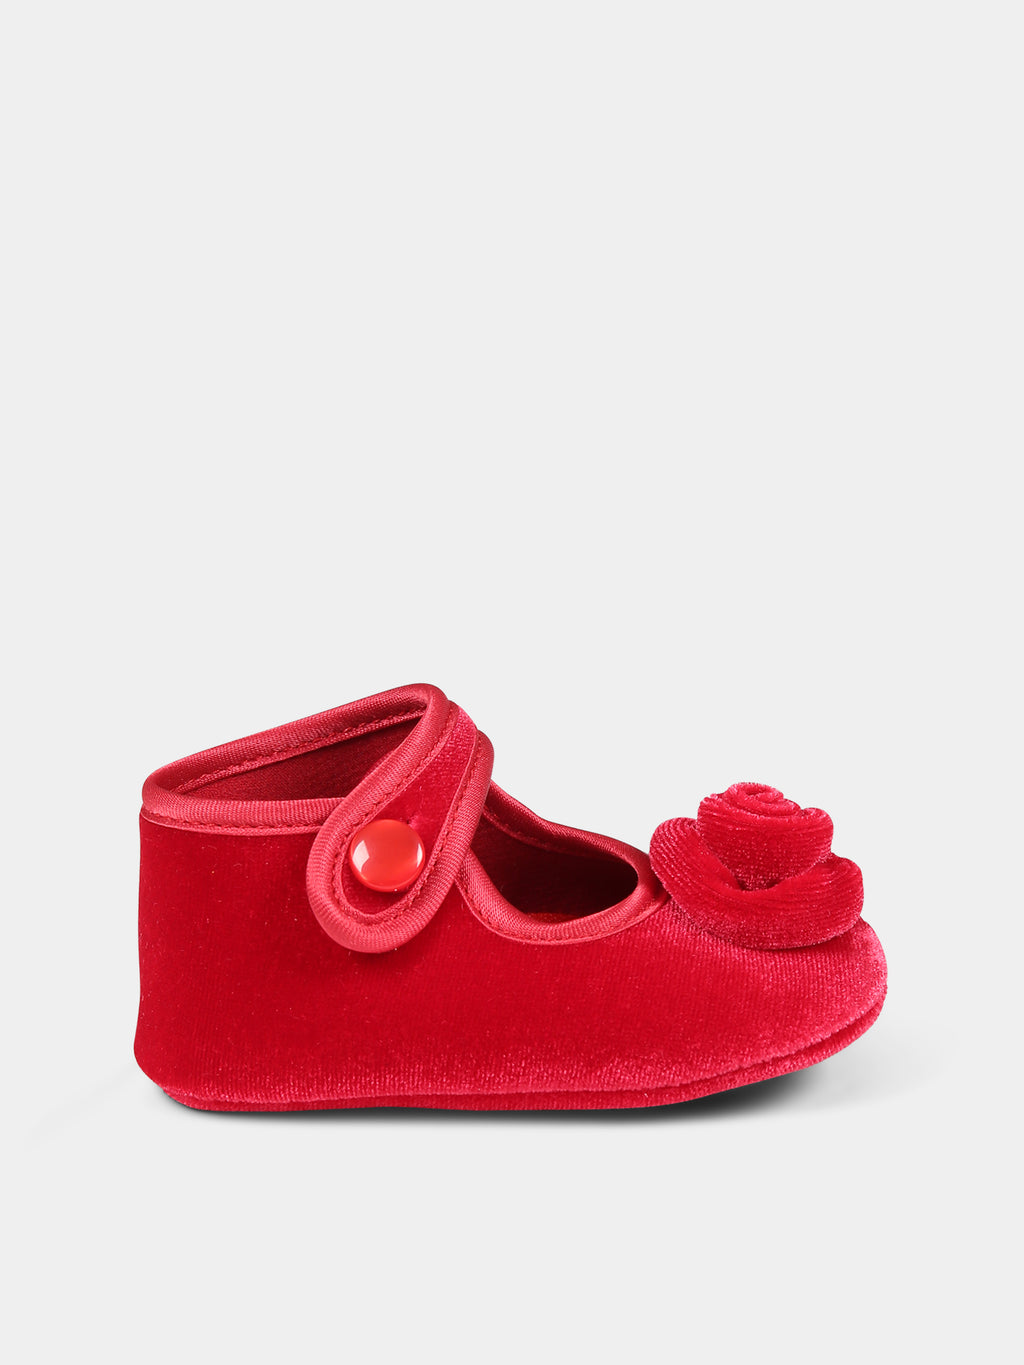 Red ballets flats for baby girl with rose